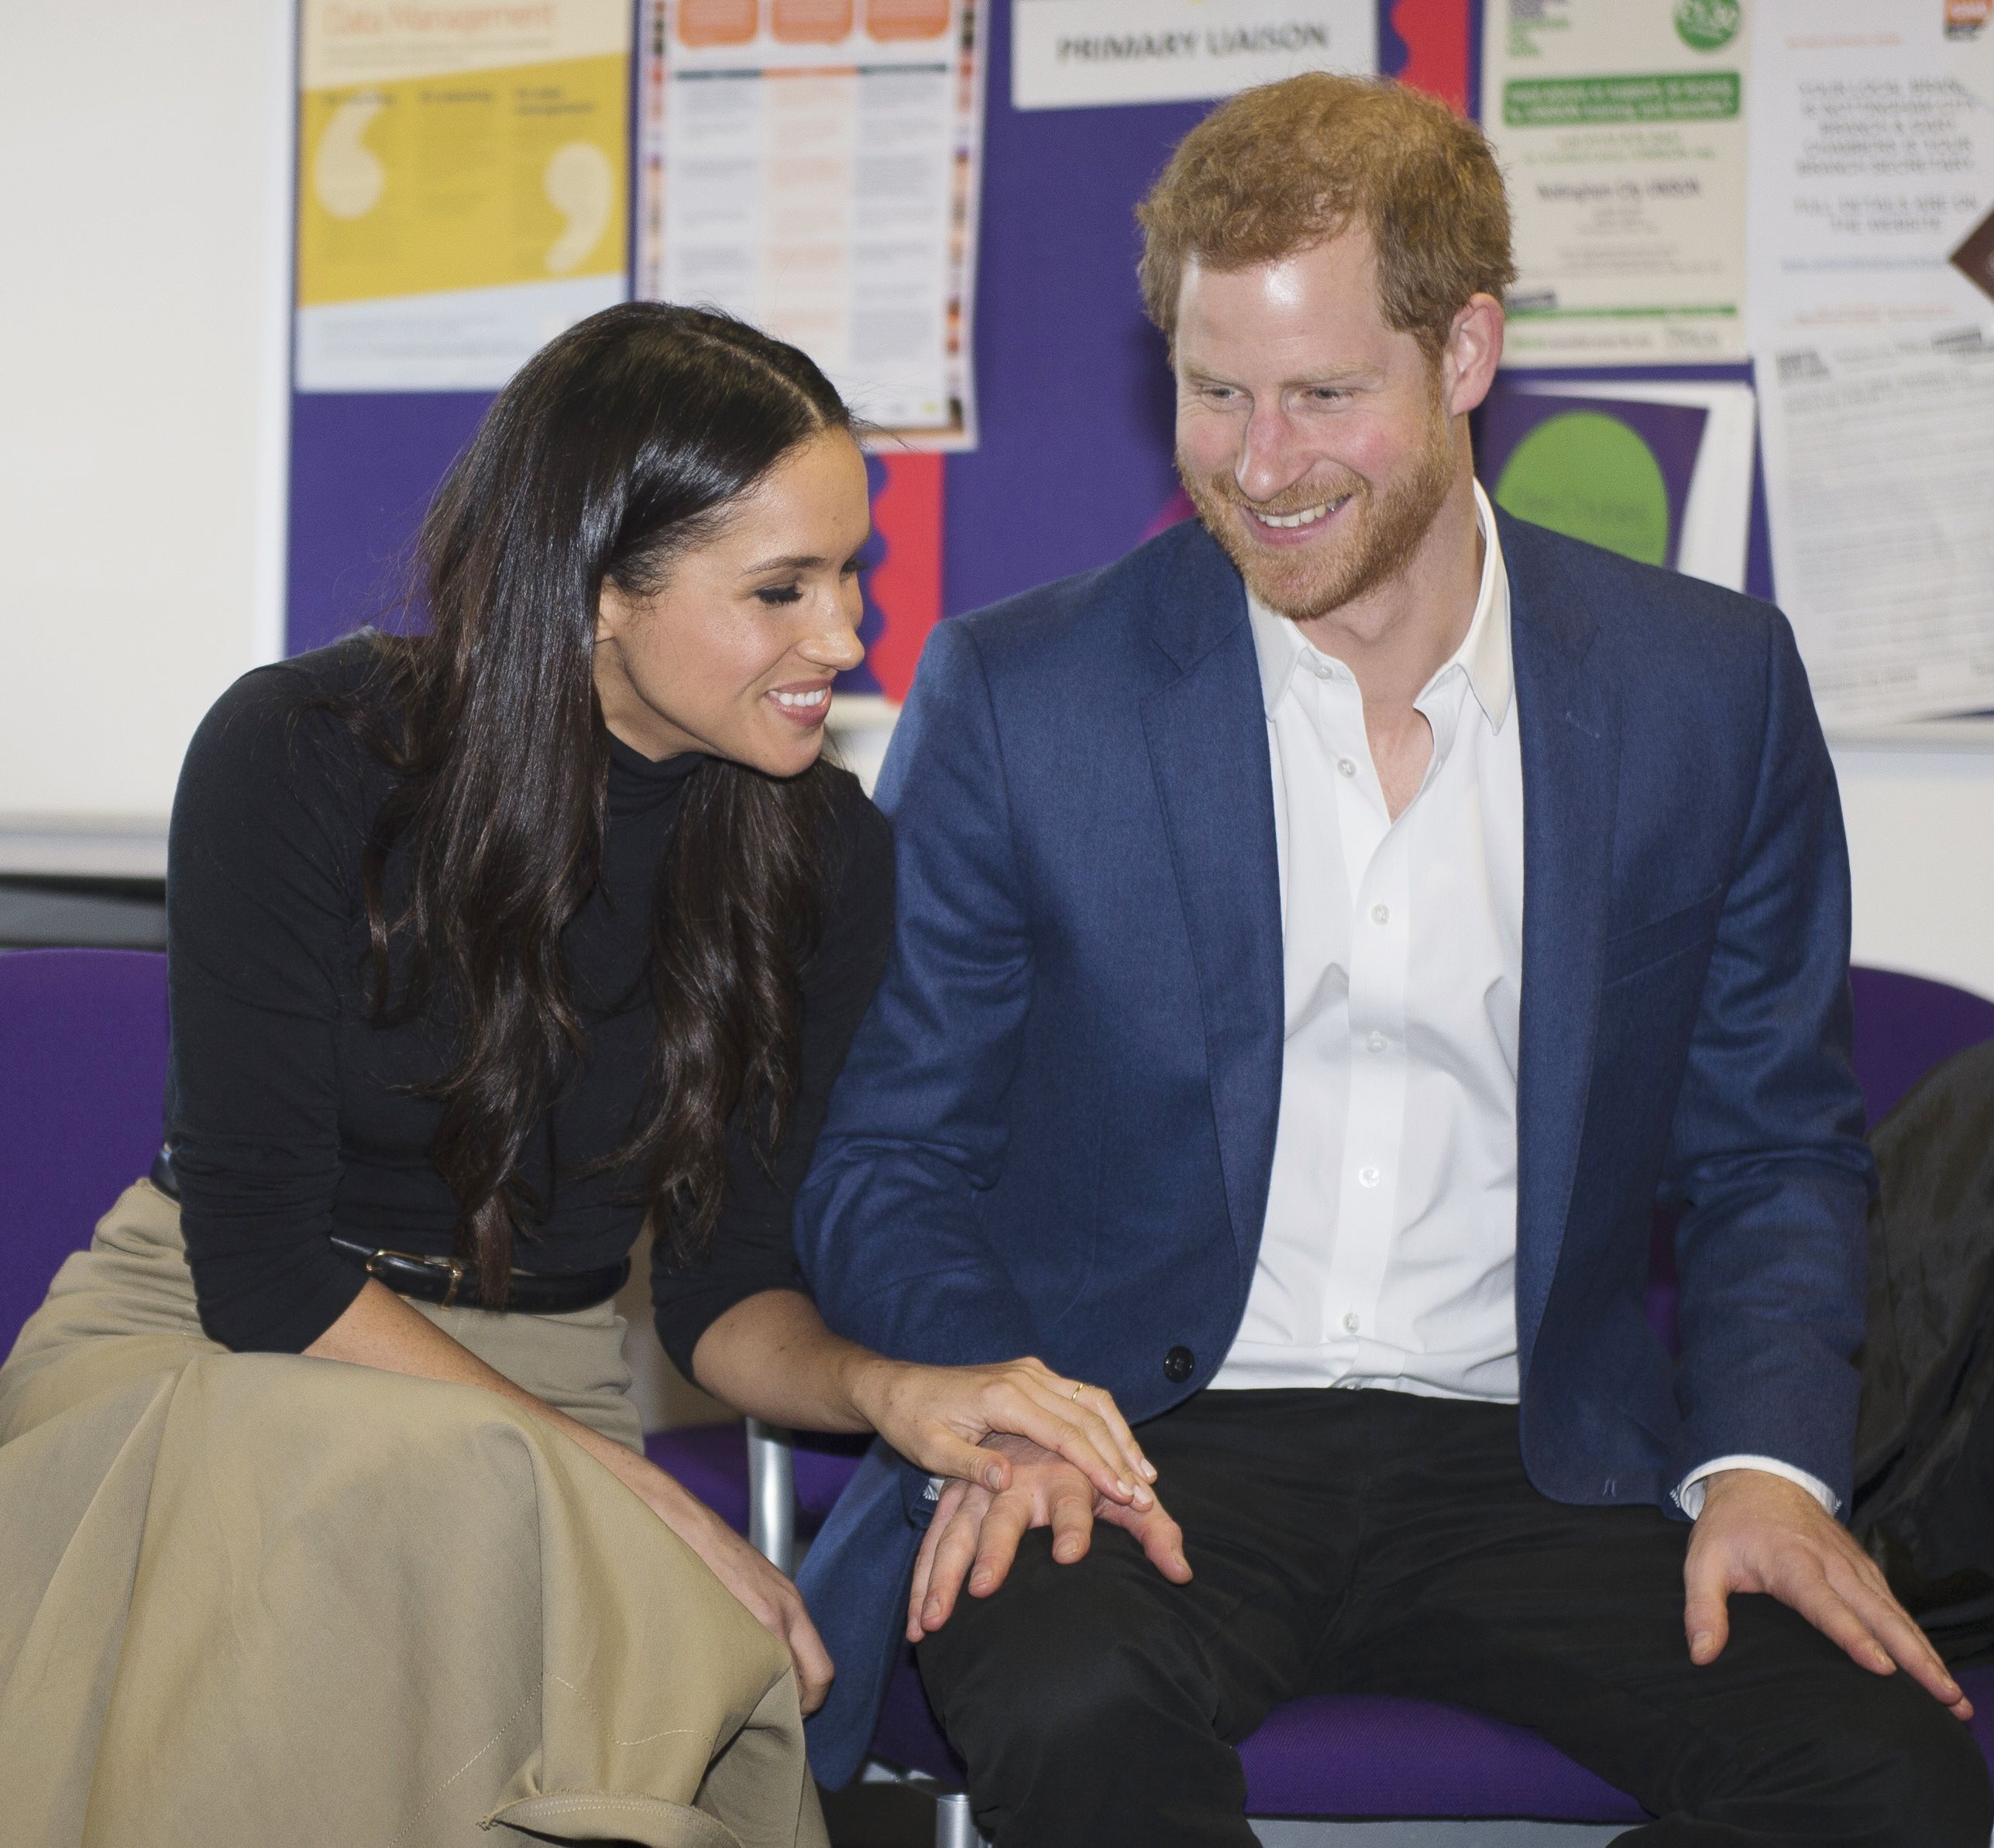 https://hips.hearstapps.com/hmg-prod.s3.amazonaws.com/images/hbz-prince-harry-meghan-markle-cute-moments-gettyimages-883624072-1523378904.jpg?crop=1xw:1xh;center,top